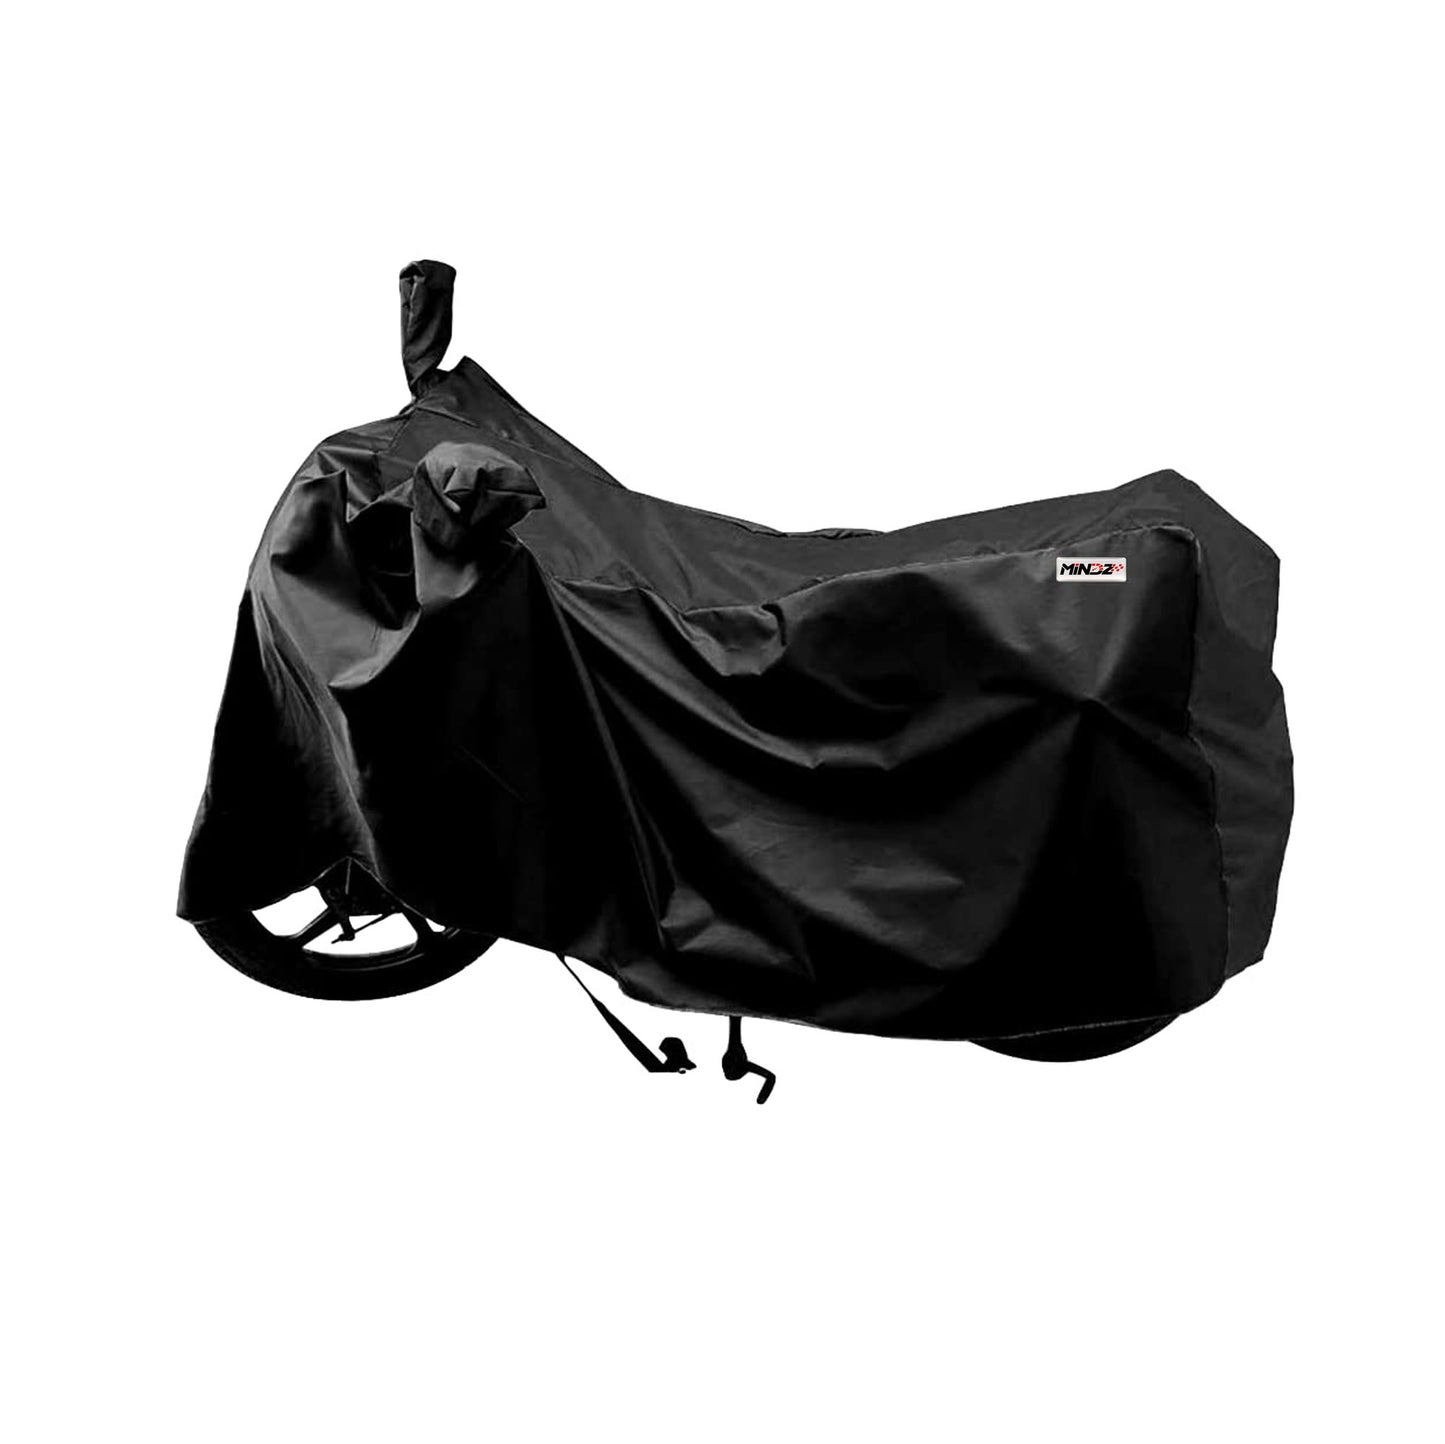 BODY COVER FOR MT 15